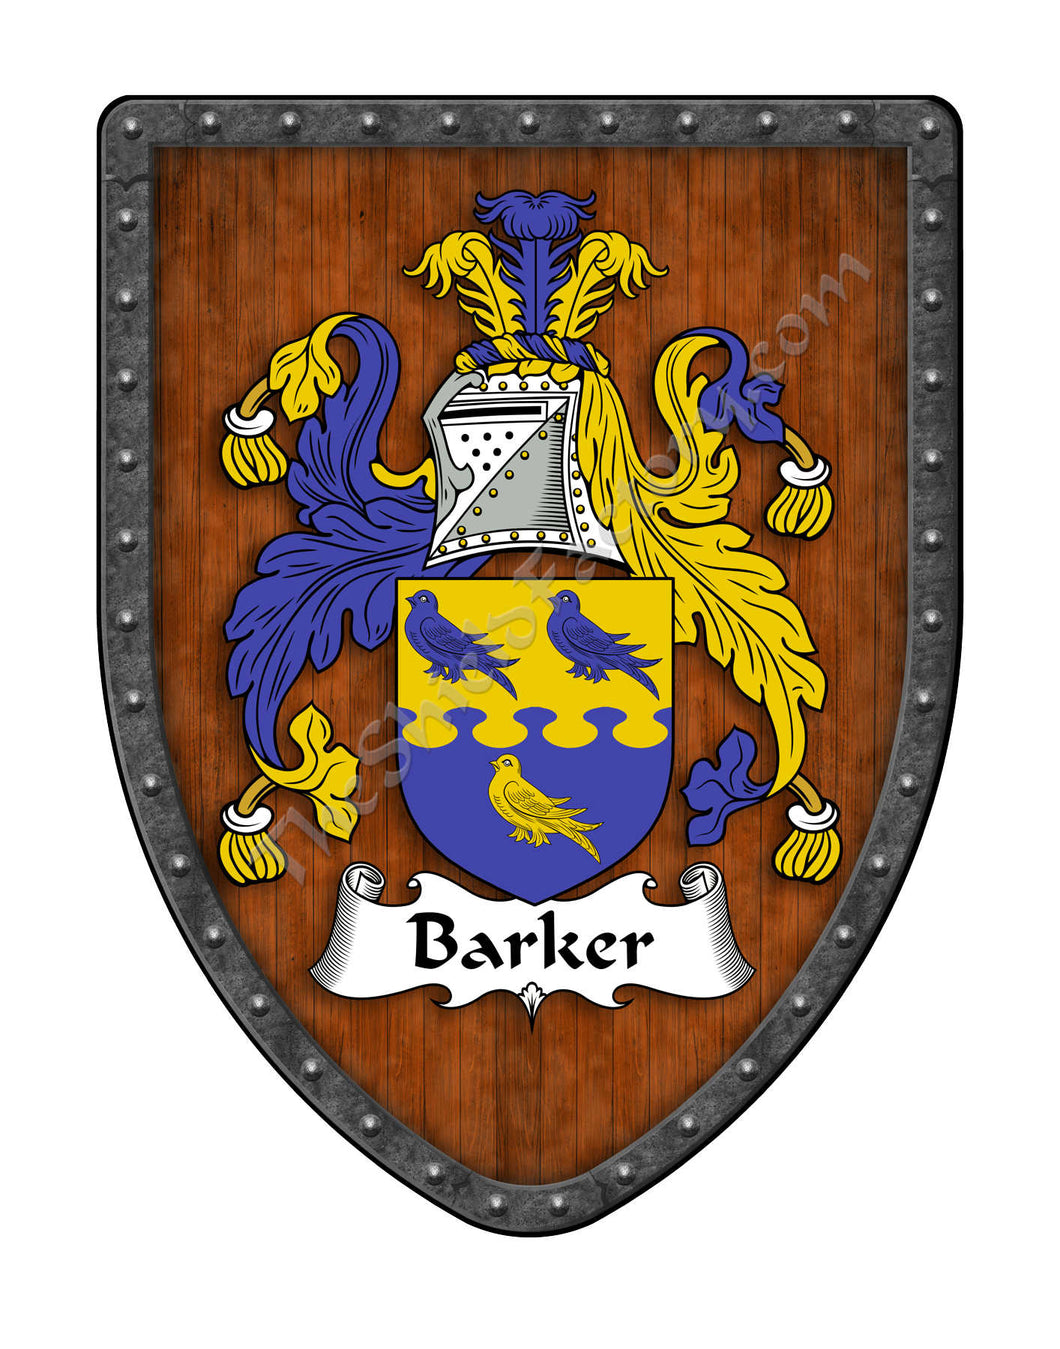 Barker Family Coat of Arms Shield